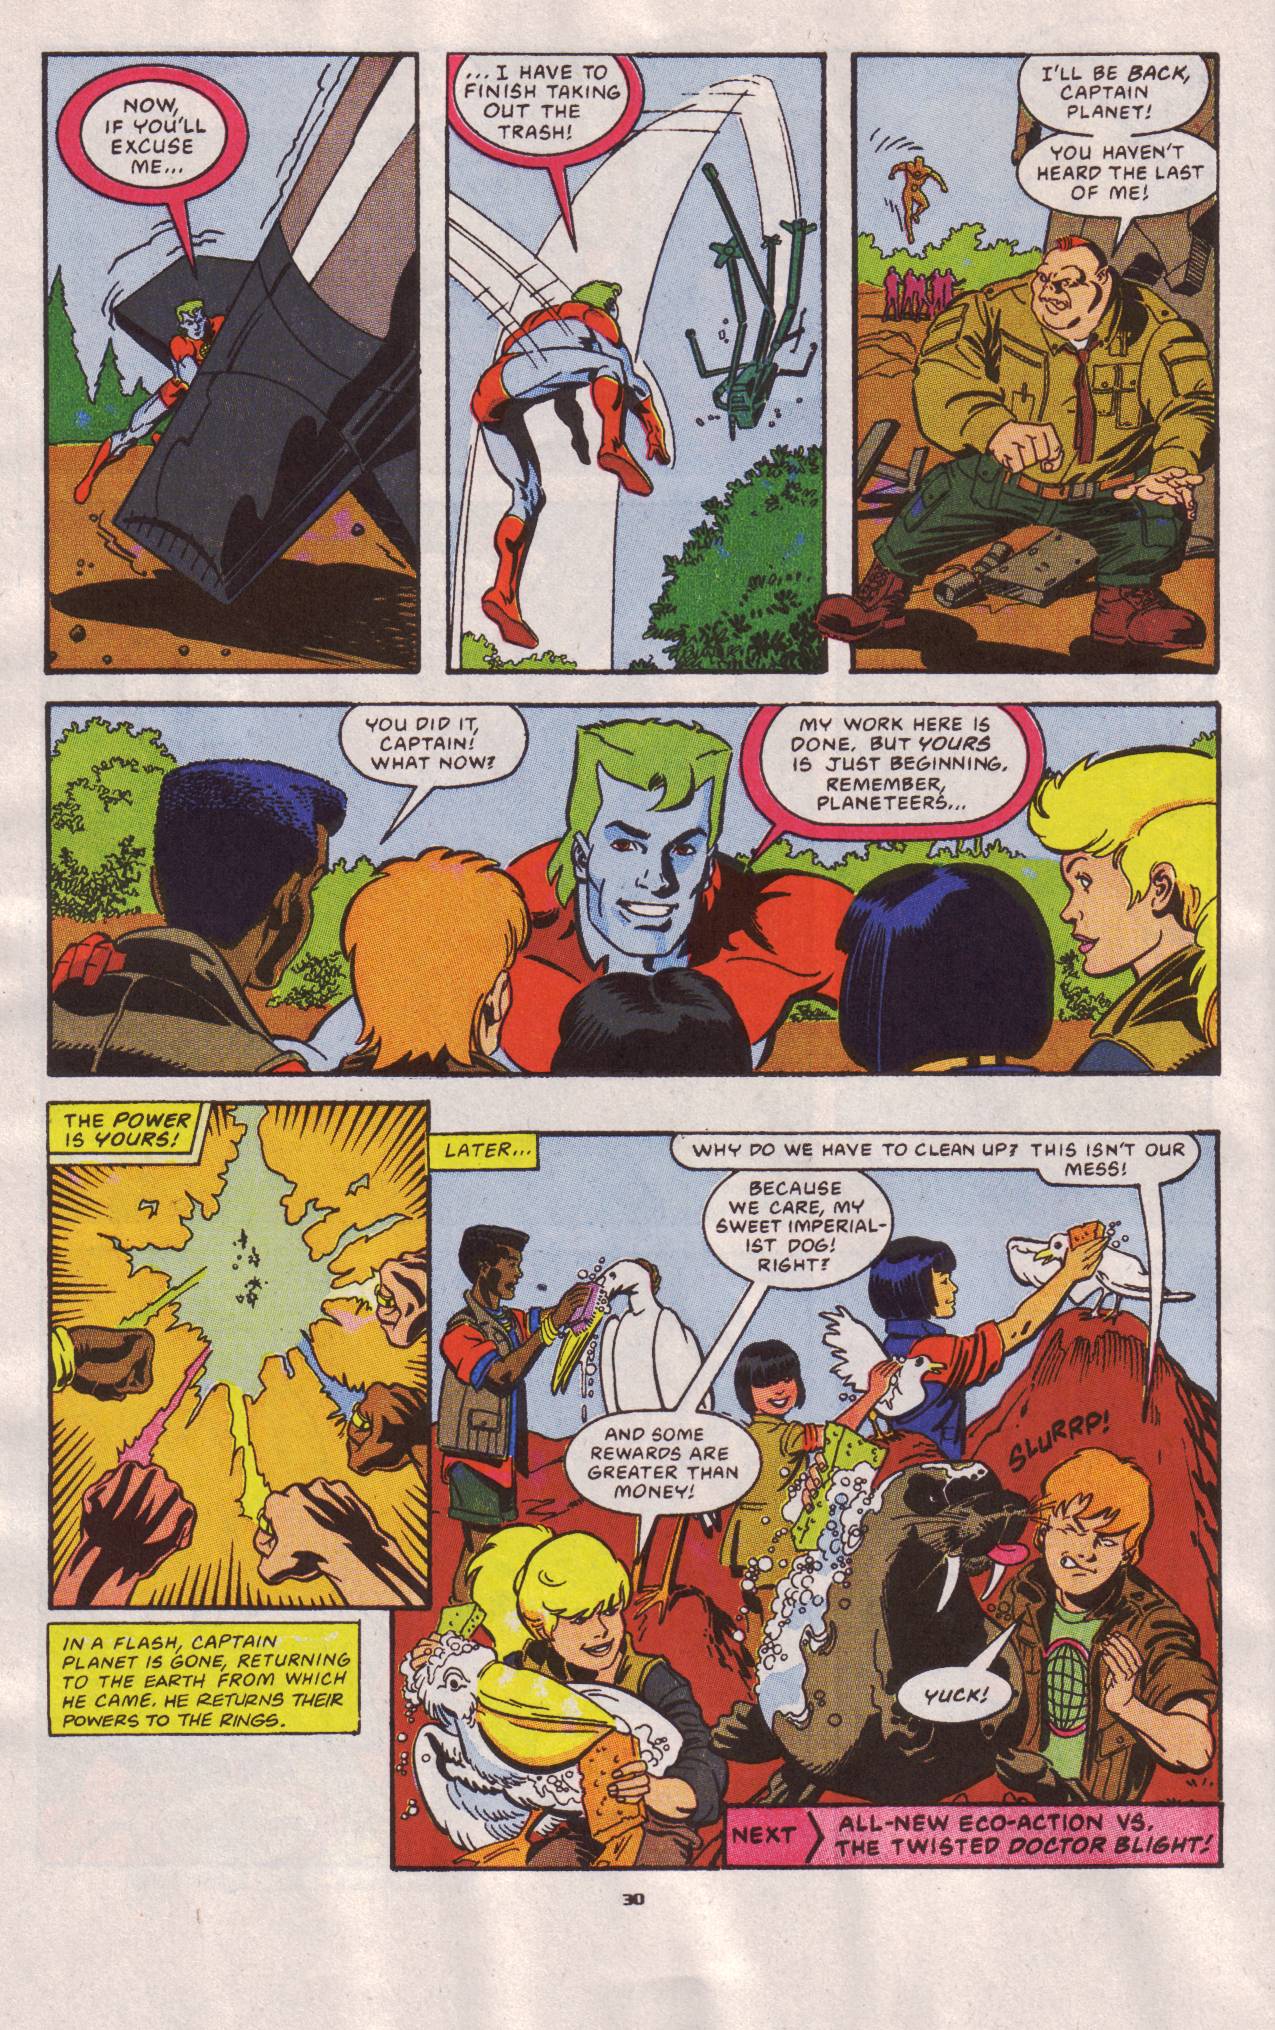 Captain Planet and the Planeteers 1 Page 22